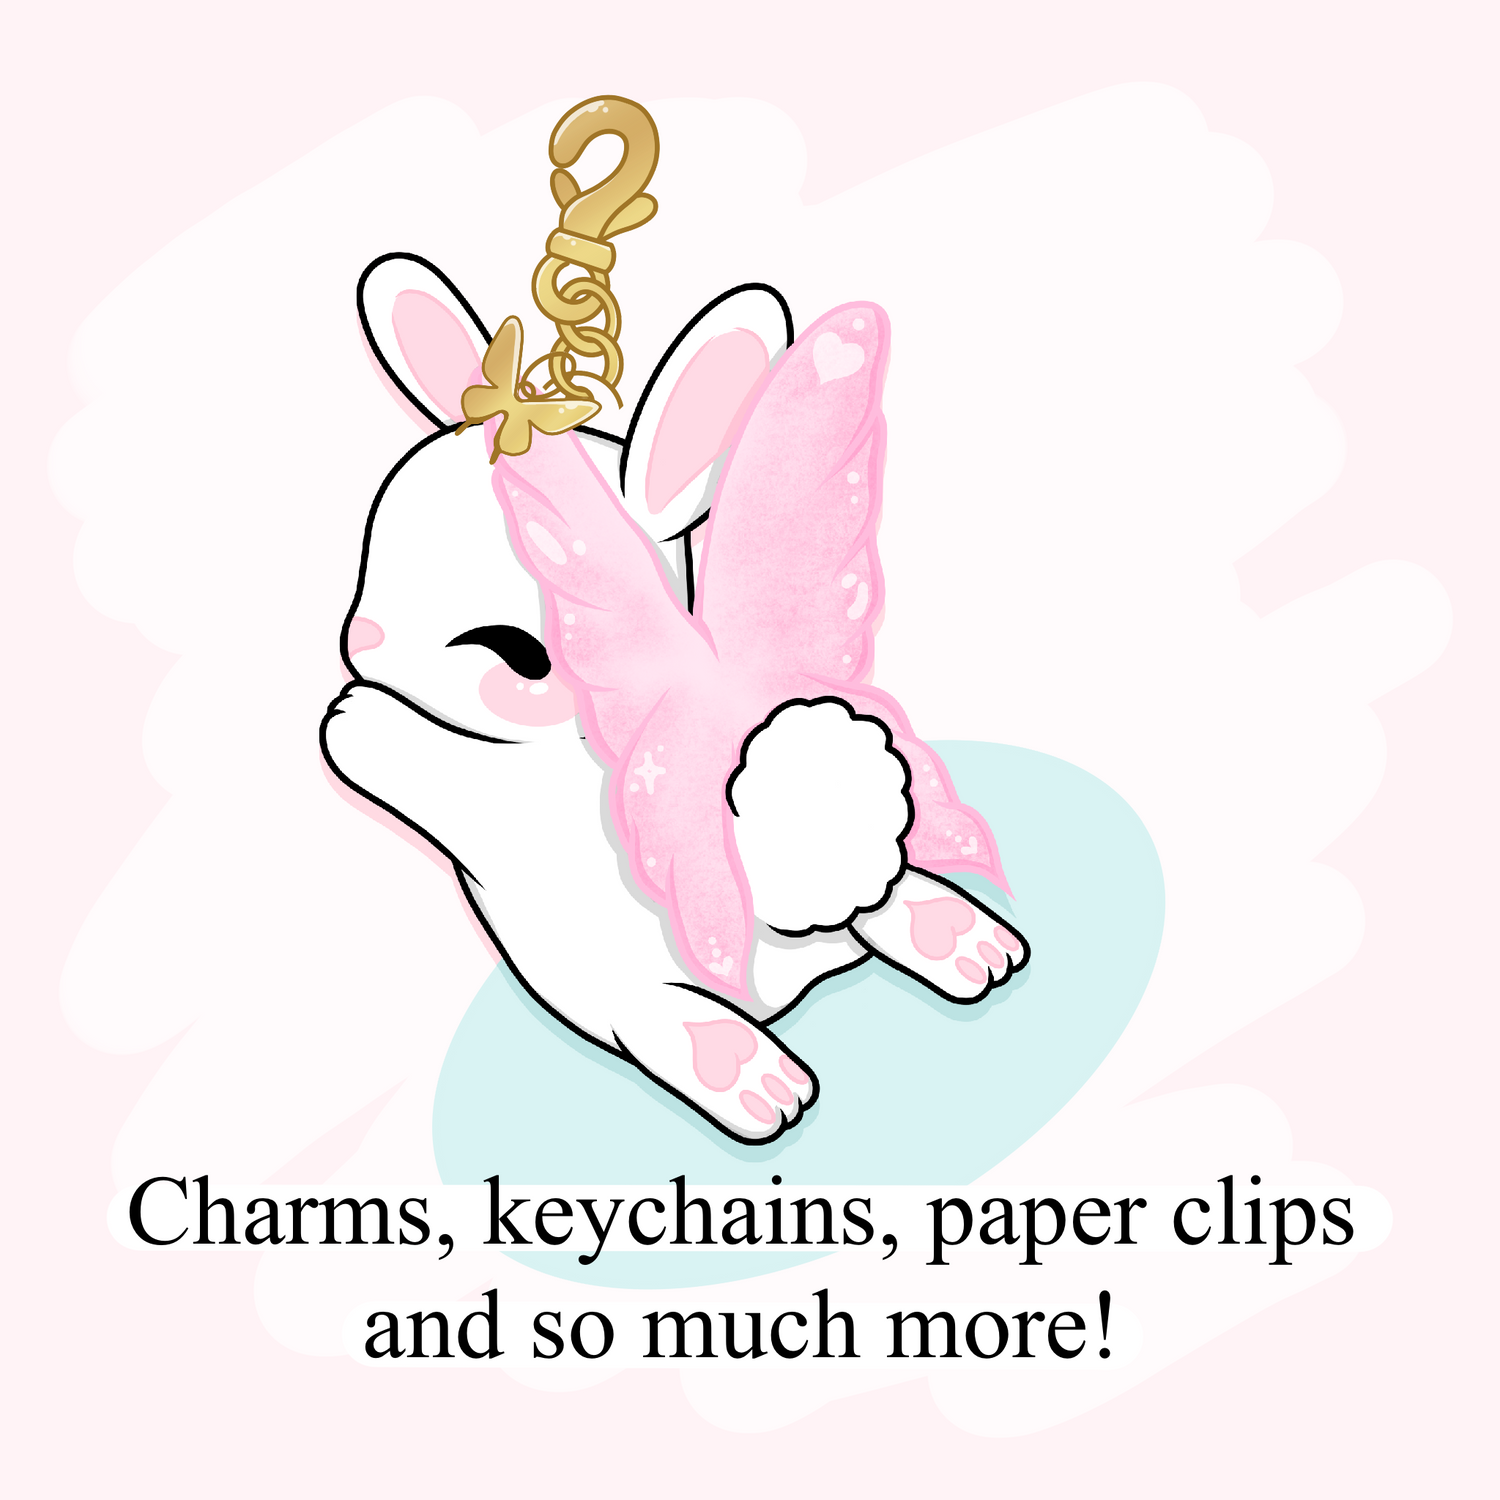 Charms, Keychains, Paper Clips...